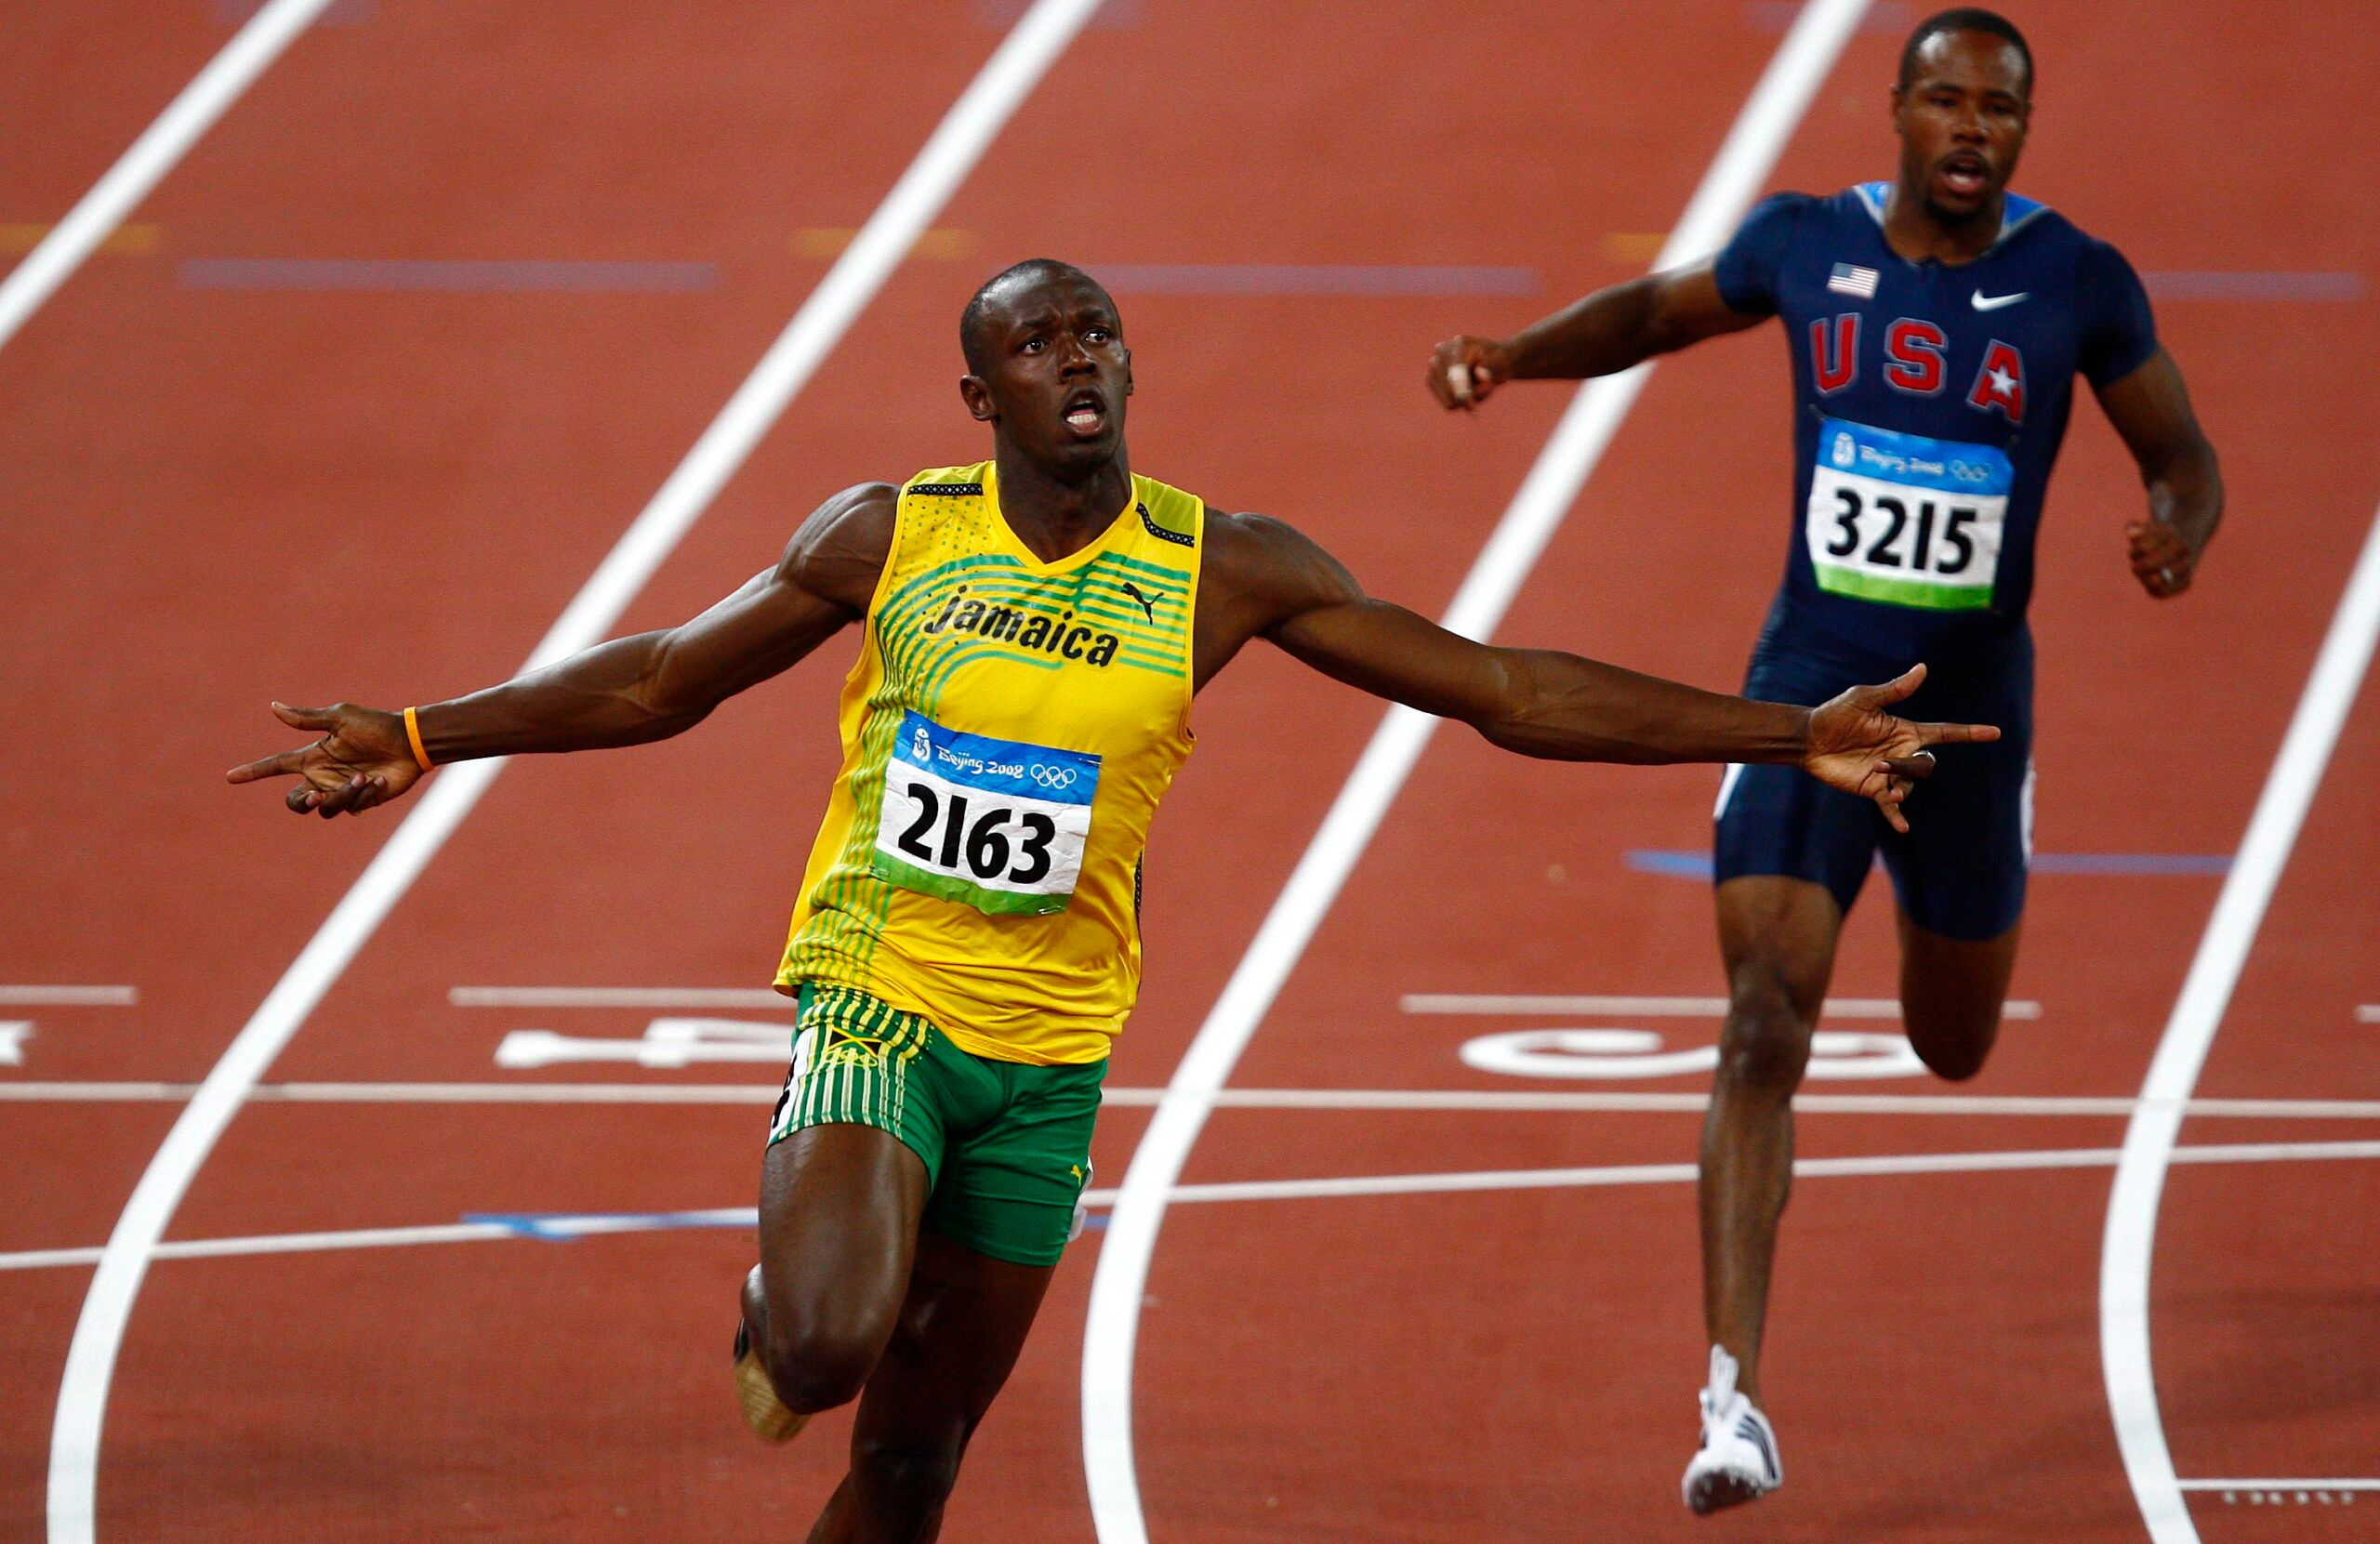 Usain Bolt's potential 100m world record had he not celebrated early in